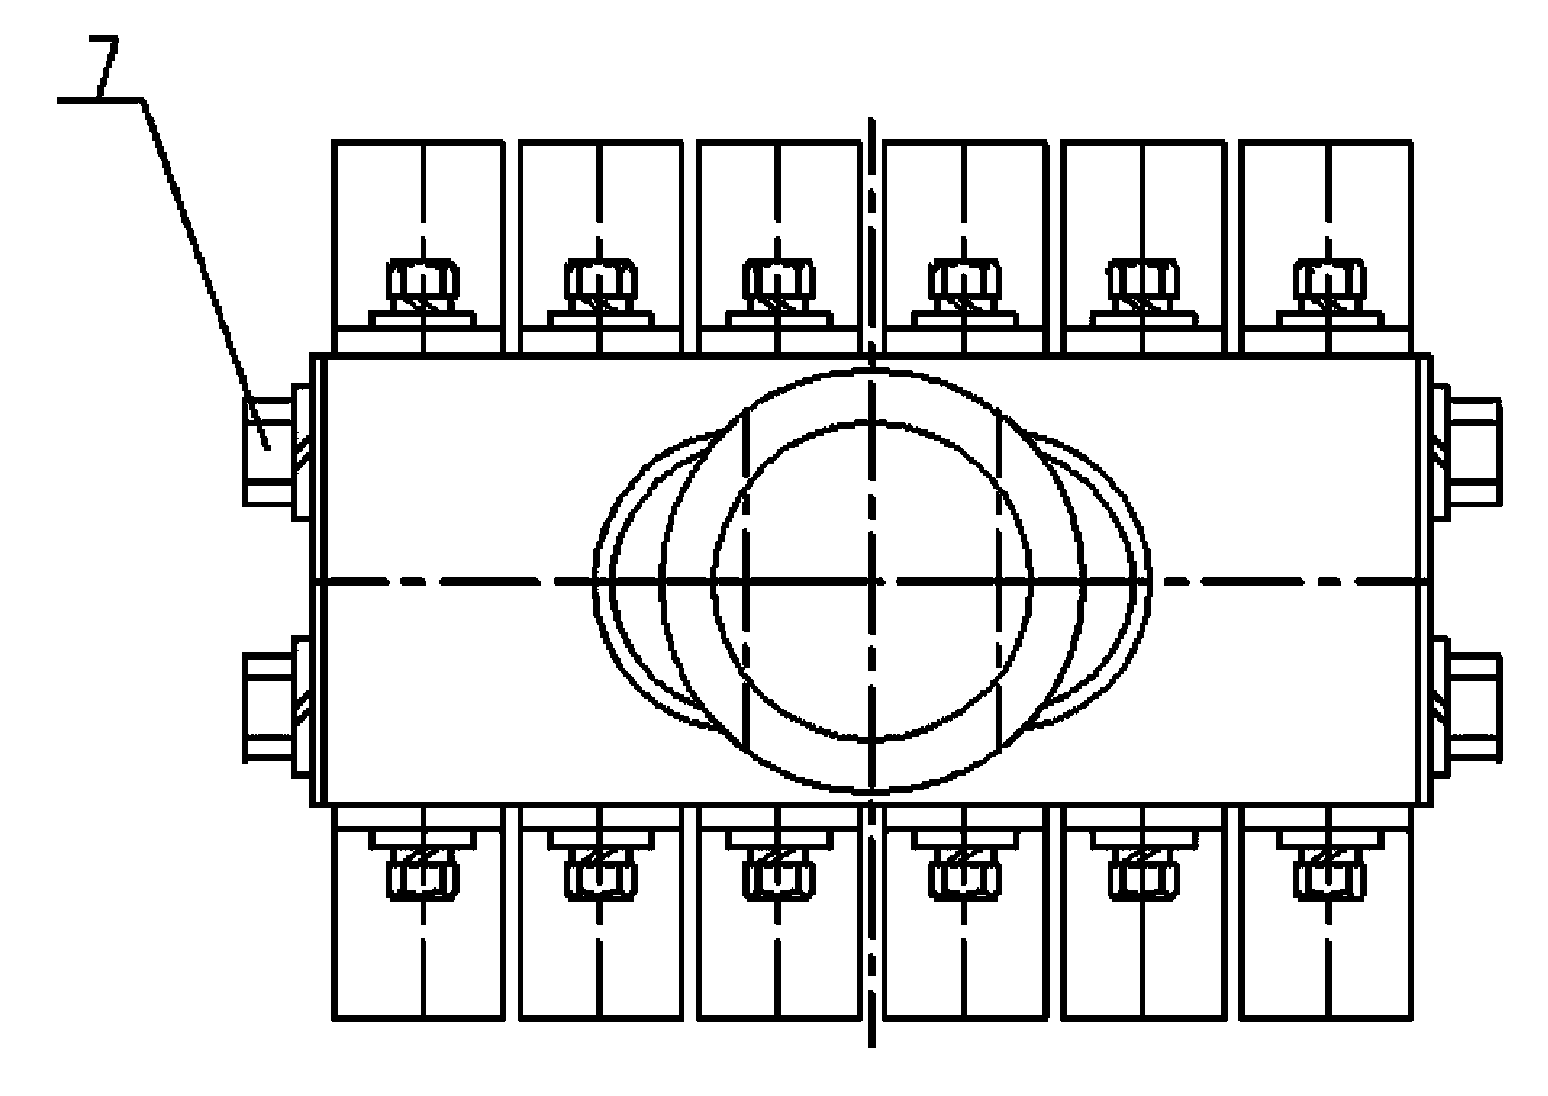 Trigger device of outside high-voltage isolation switch